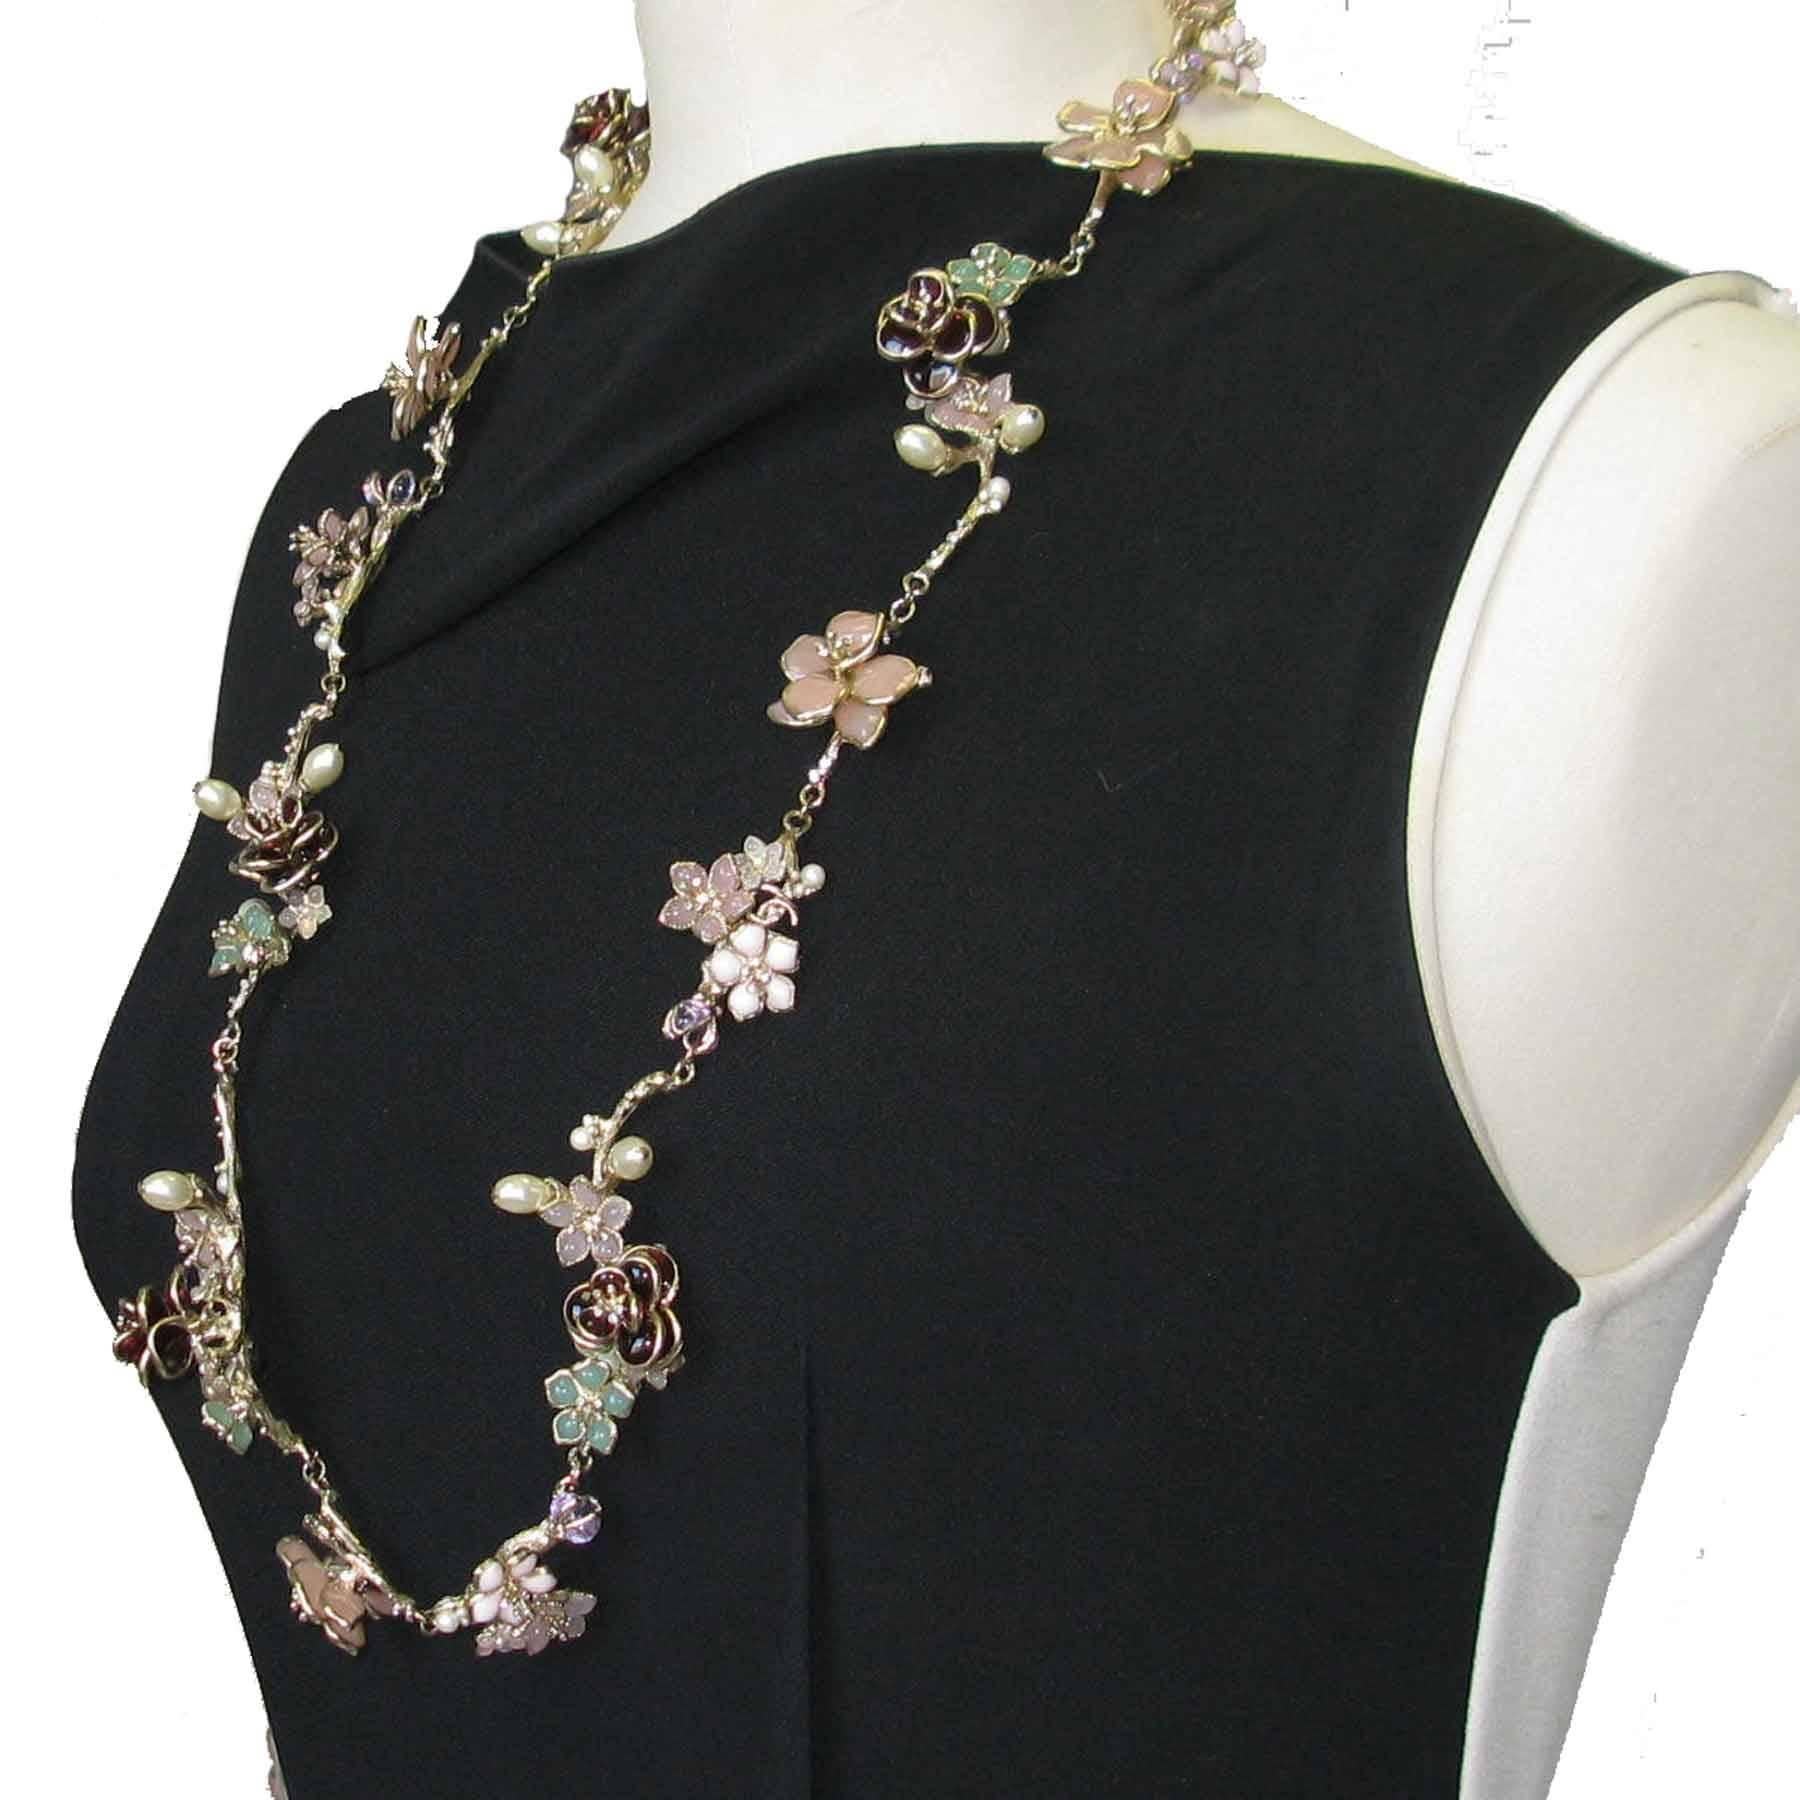 CHANEL Couture Belt in Gilded Metal and Flowers in Molten Glass 1